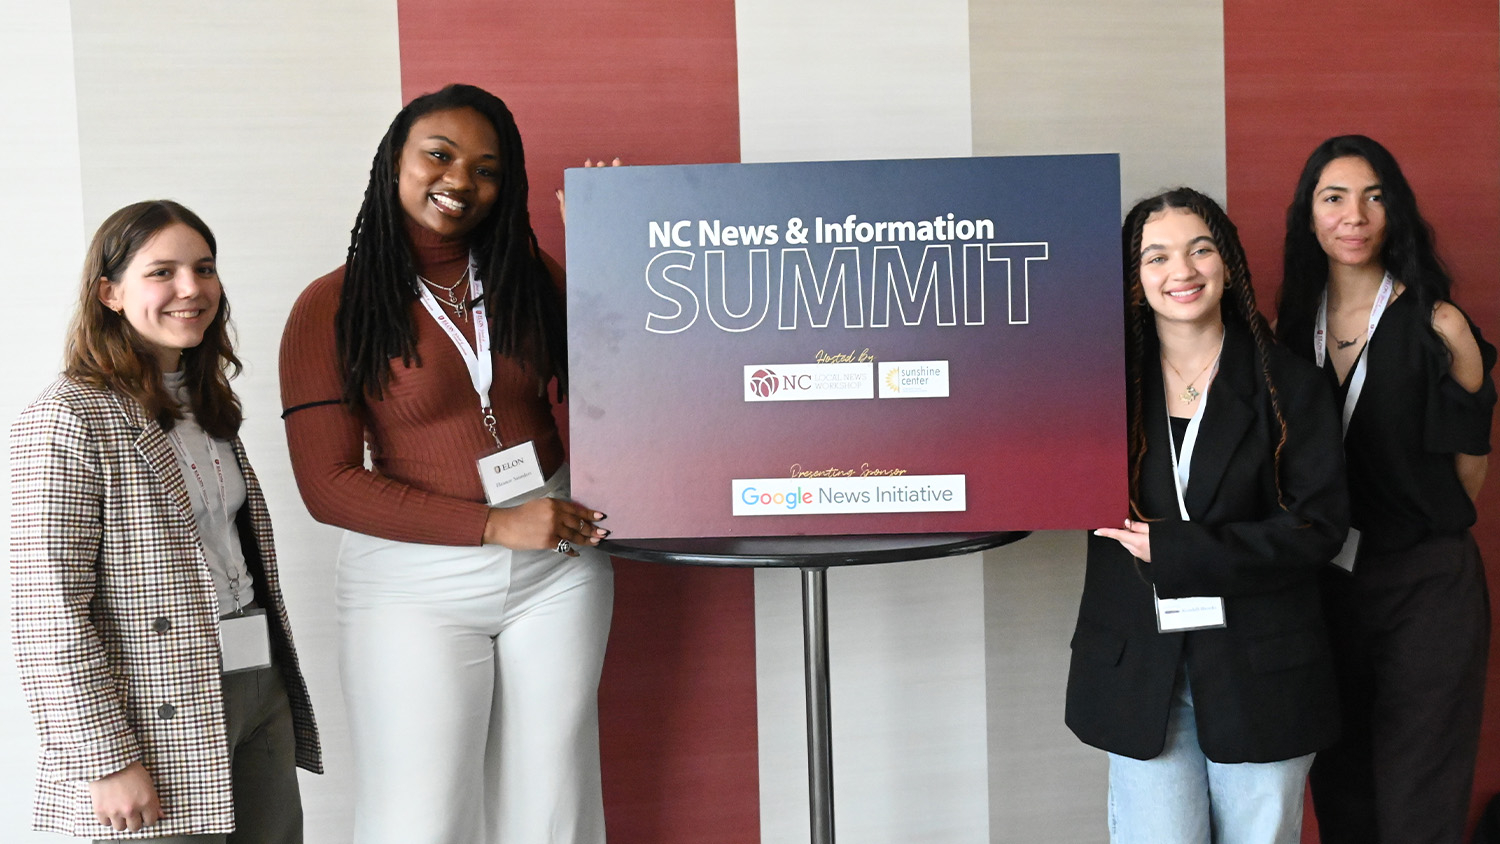 From left, Jameson Wolf, Eleanor Saunders, Alianna Kendall-Brooks and Jelina-jo Miller were among the students who traveled to the NC News & Information Summit on March 8. Photo by Tommy Kopetskie, Elon University.